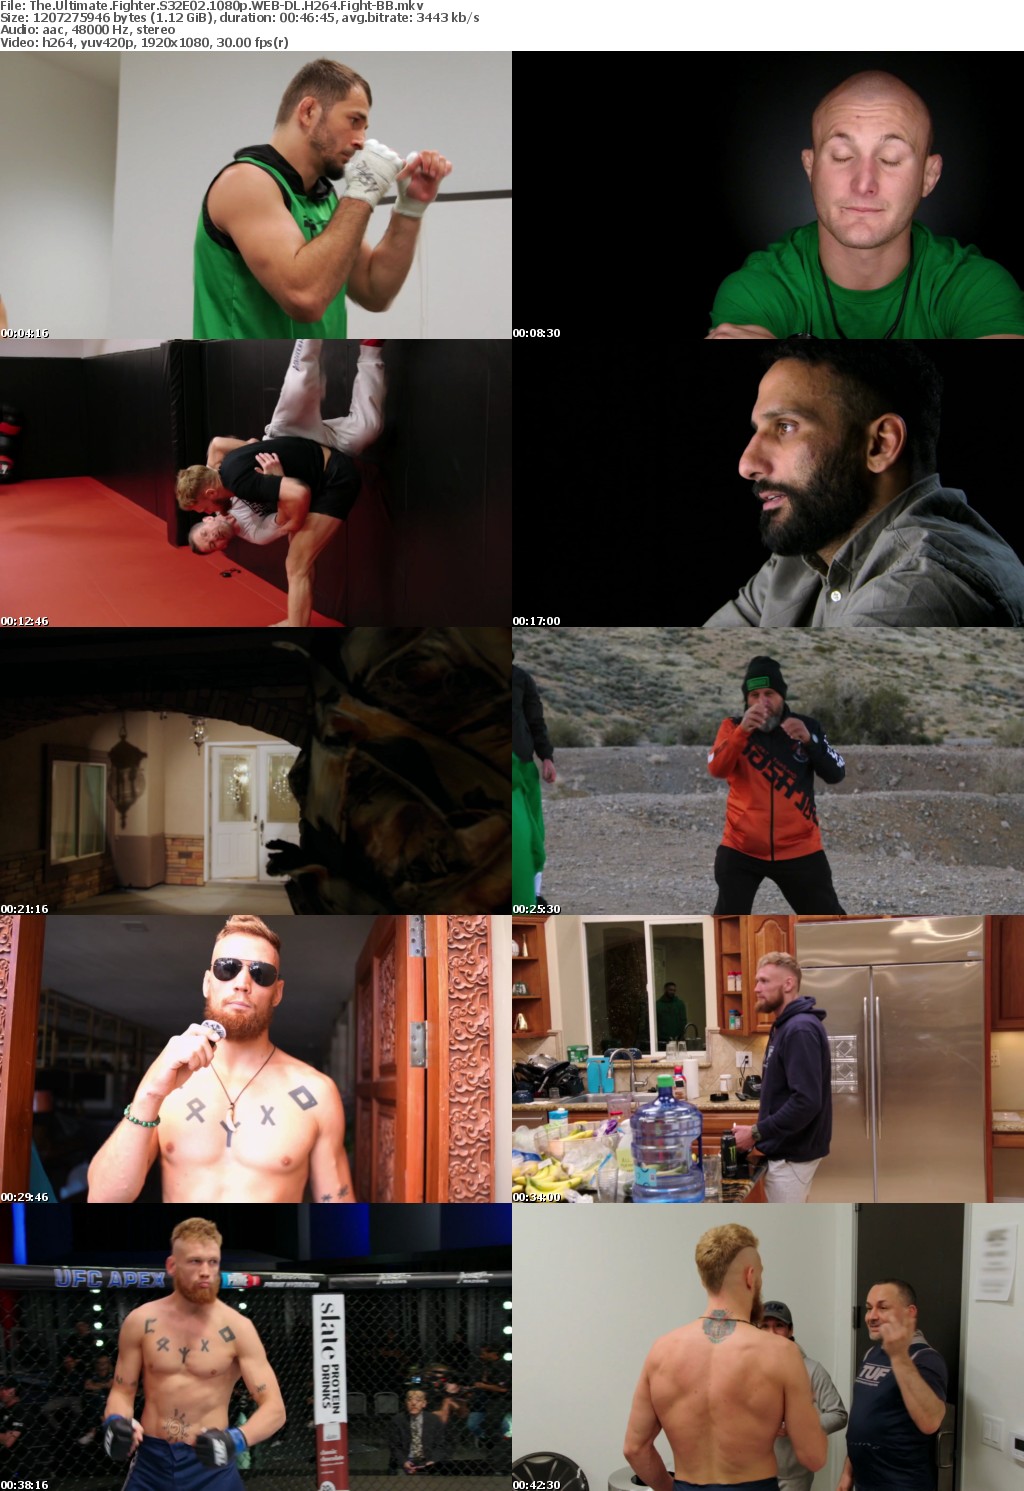 The Ultimate Fighter S32E02 1080p WEB-DL H264 Fight-BB